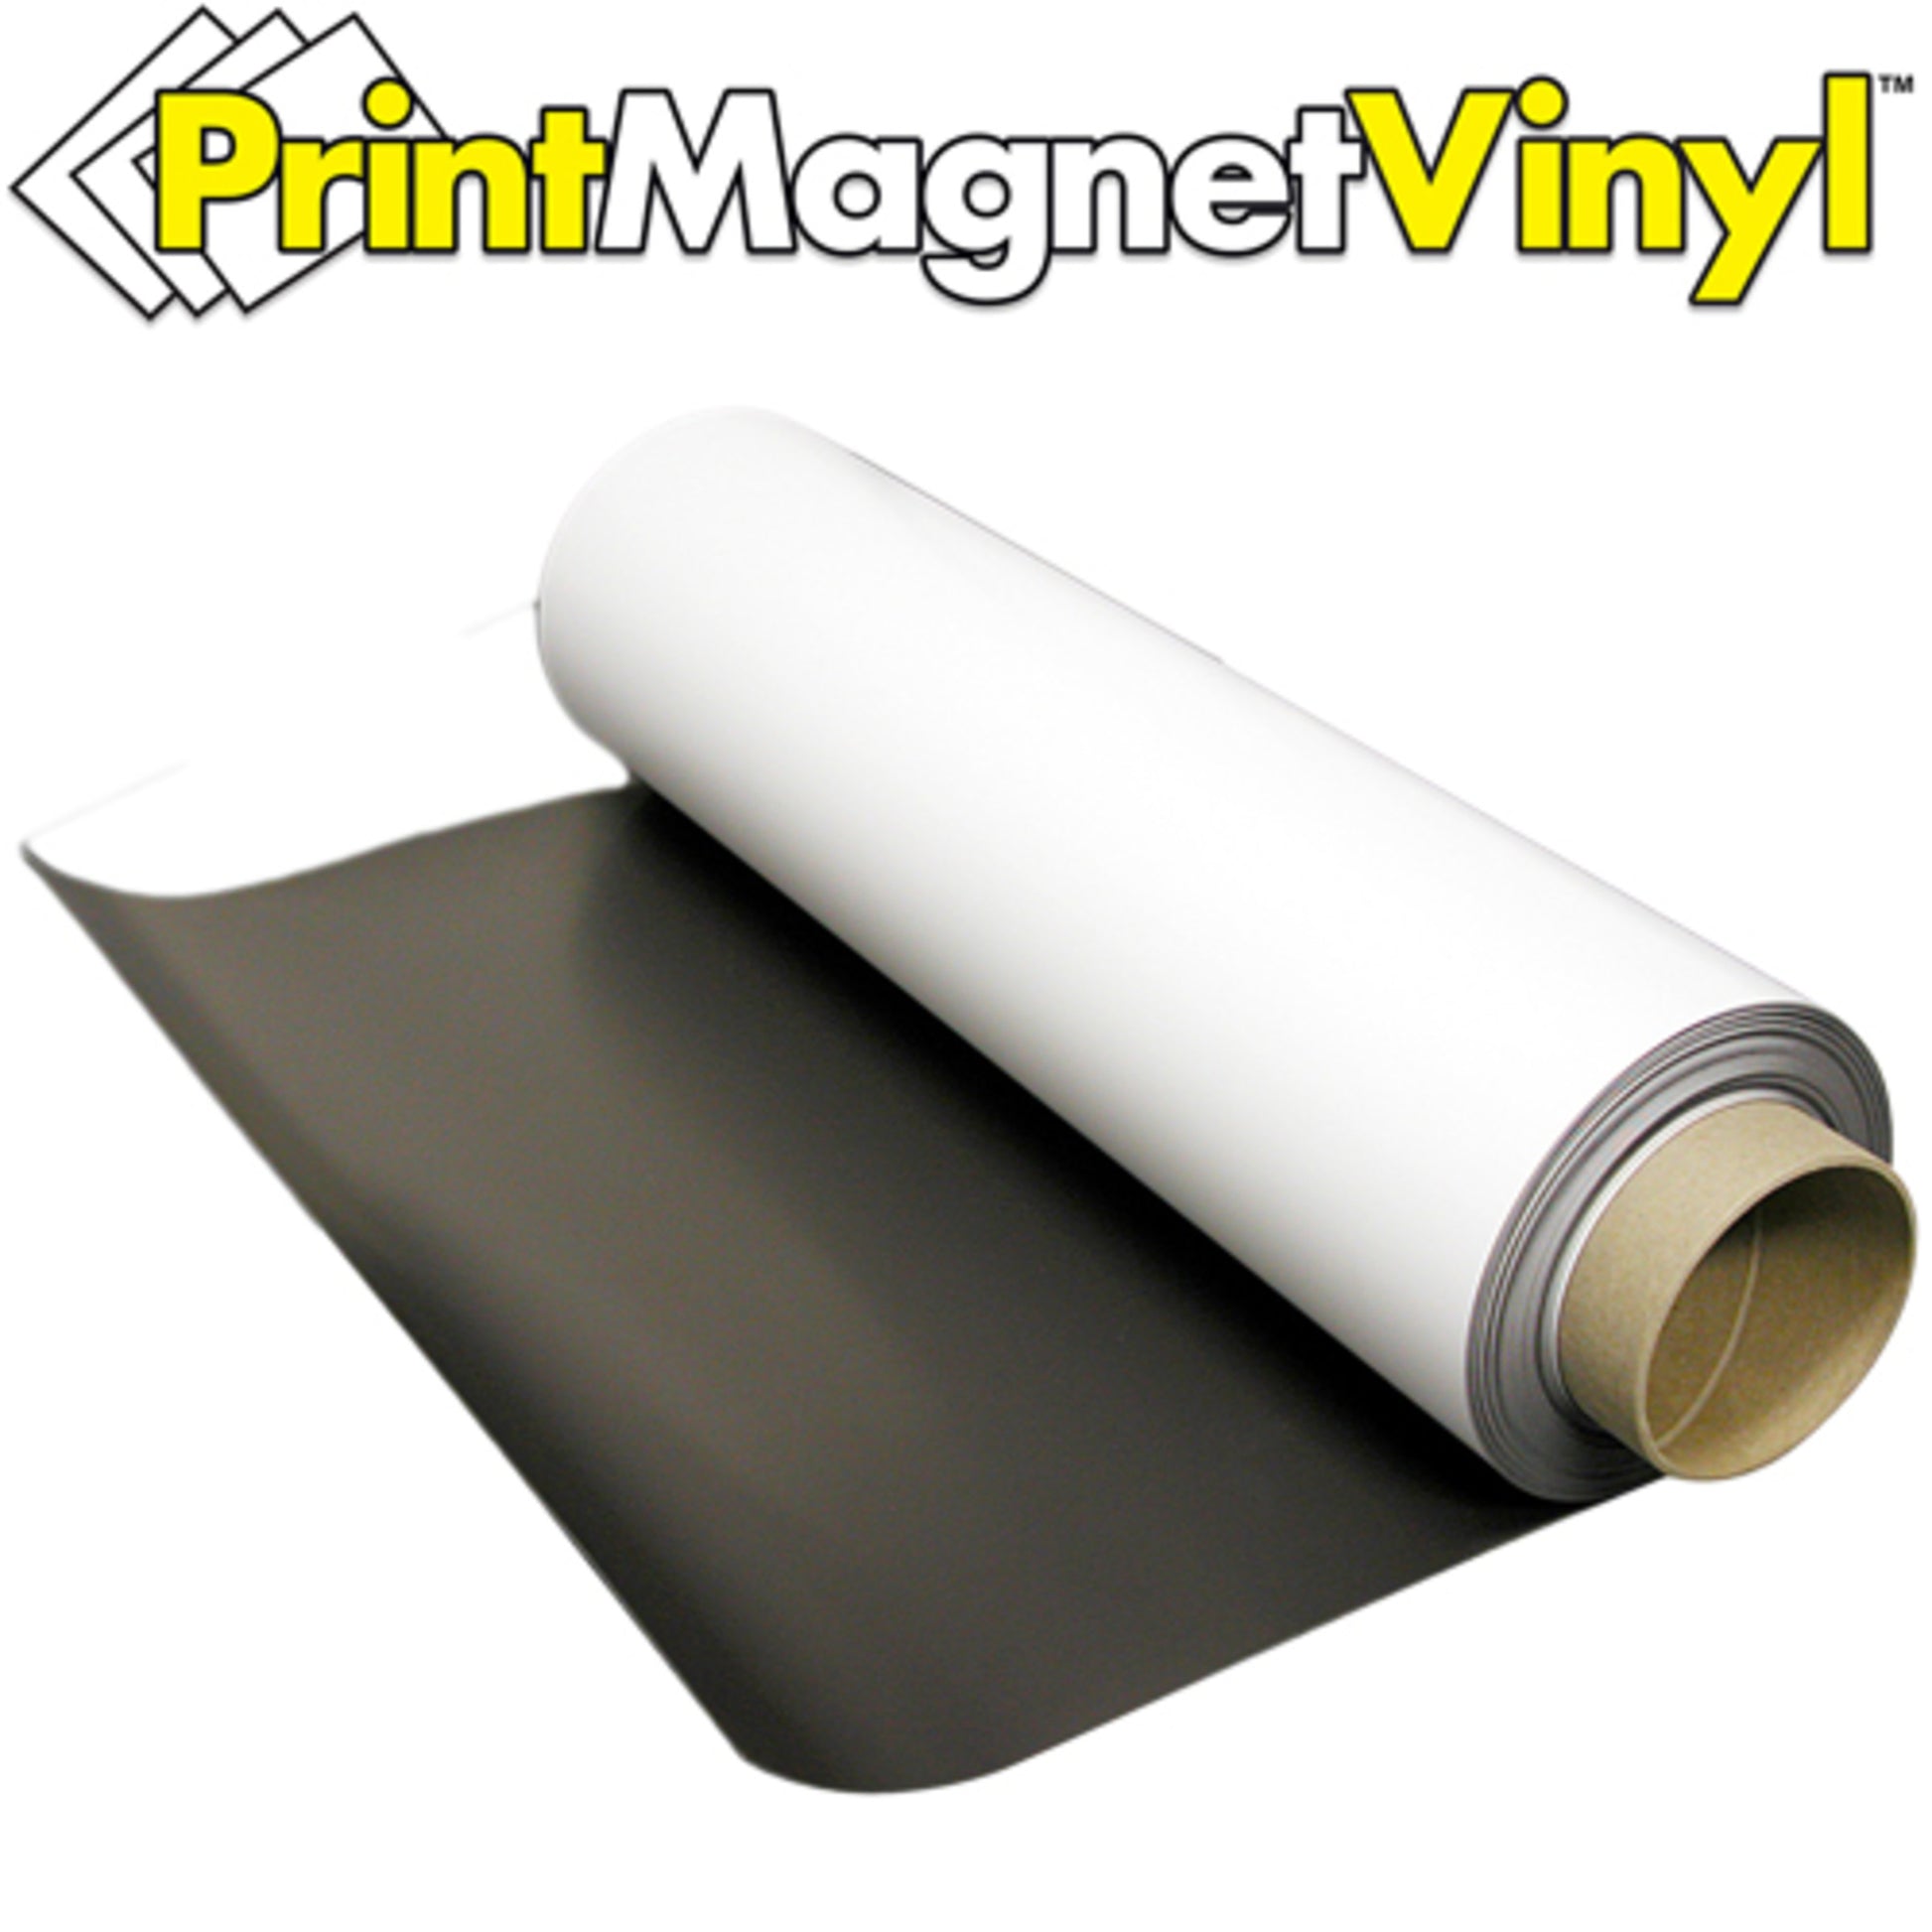 Load image into Gallery viewer, ZG6024GW10 PrintMagnetVinyl™ Flexible Magnetic Sheet - In Use